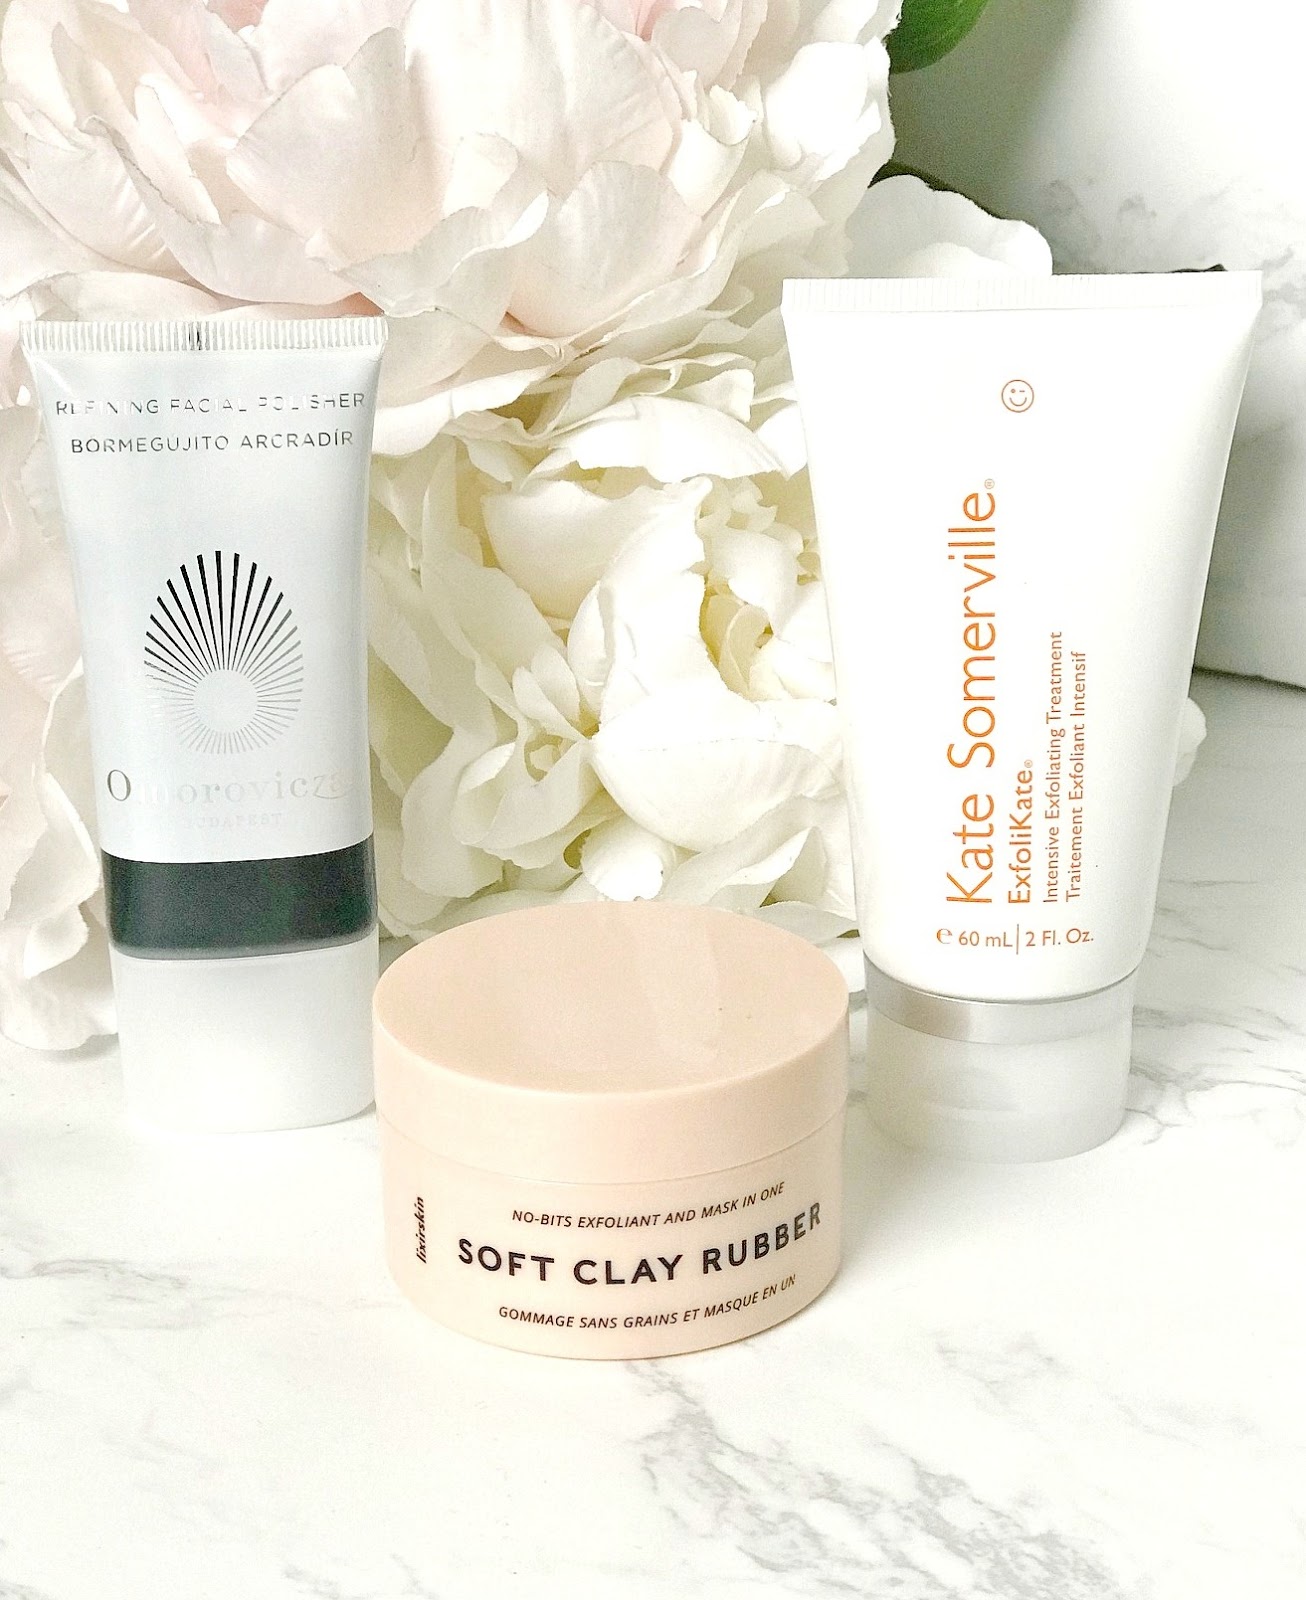 Kate Sommerville Exfolikate Review, Cult Beauty Discount, Omorovicza Refining Facial Polisher Review, Lixirskin Rubber Clay Mask Review